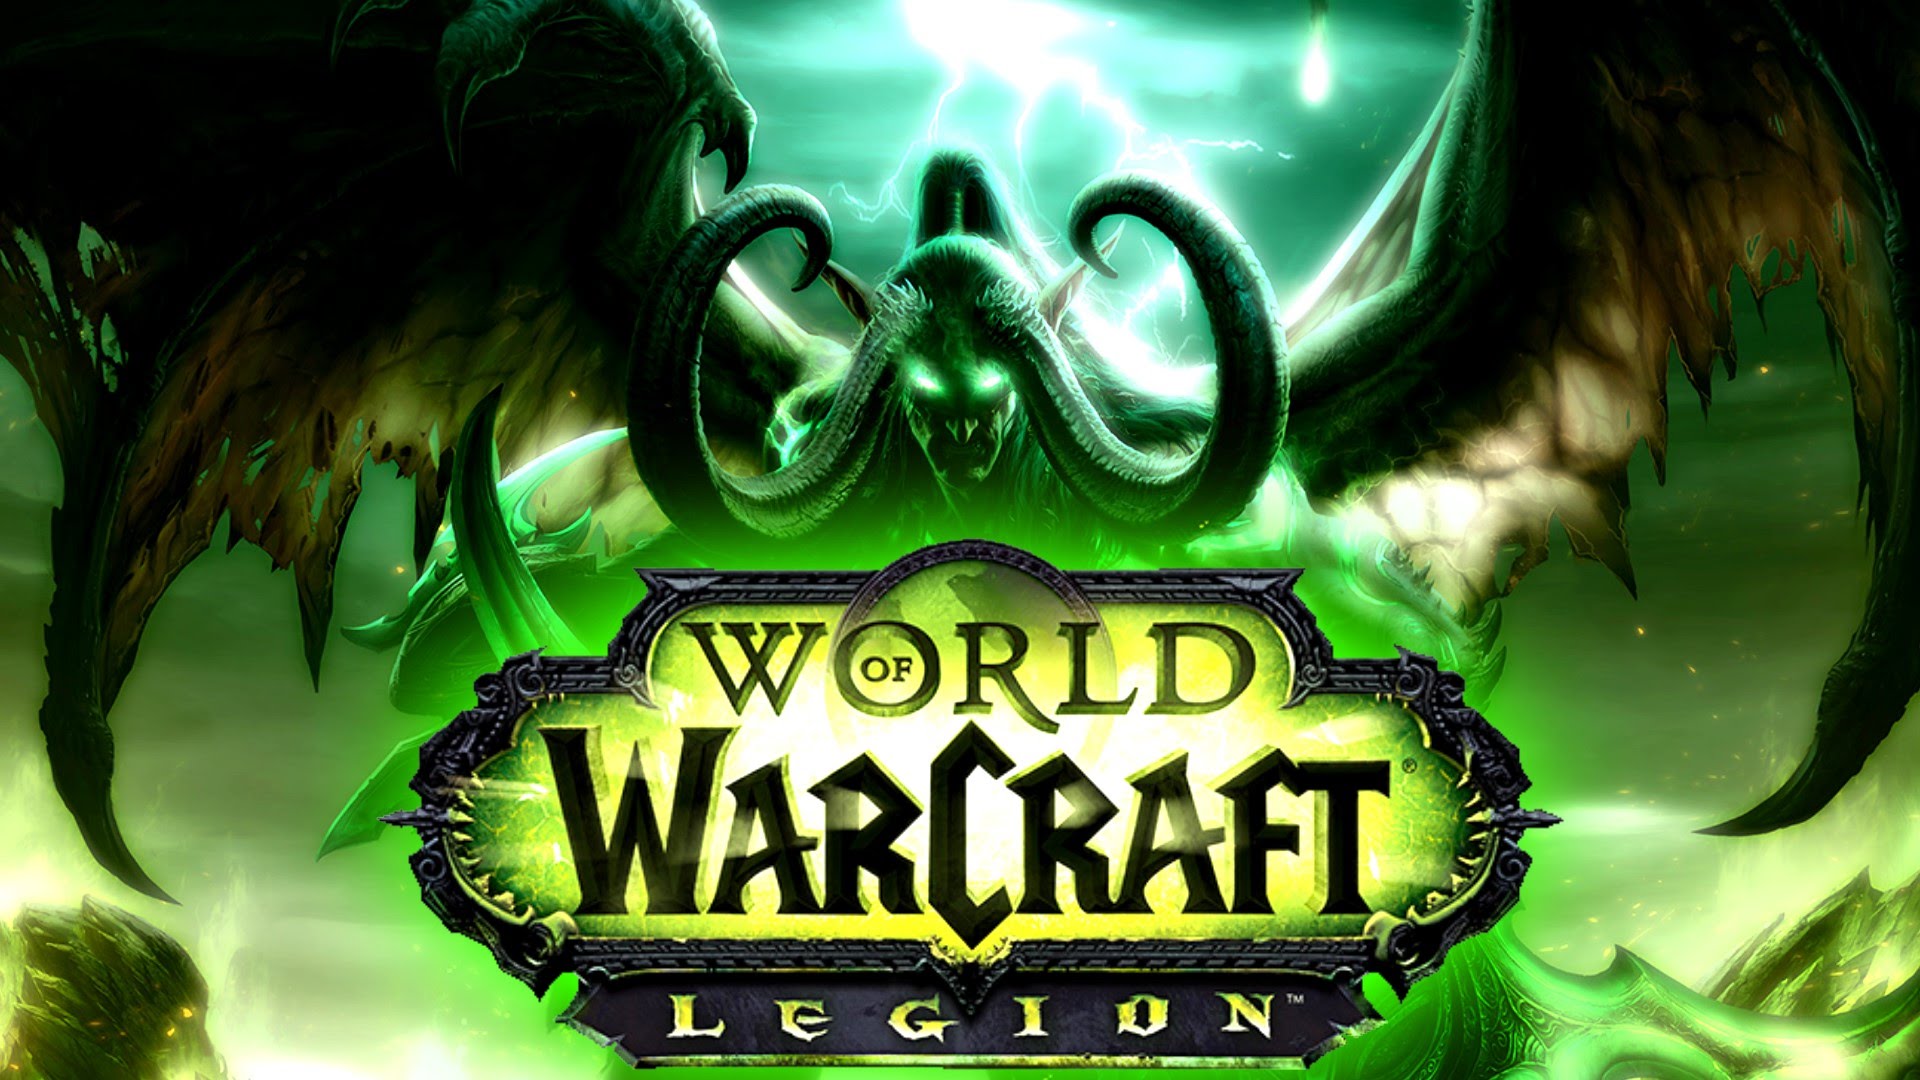 World of Warcraft: Blizzard admits Titanforging RNG got out of control in Legion, changes coming in Battle for Azeroth